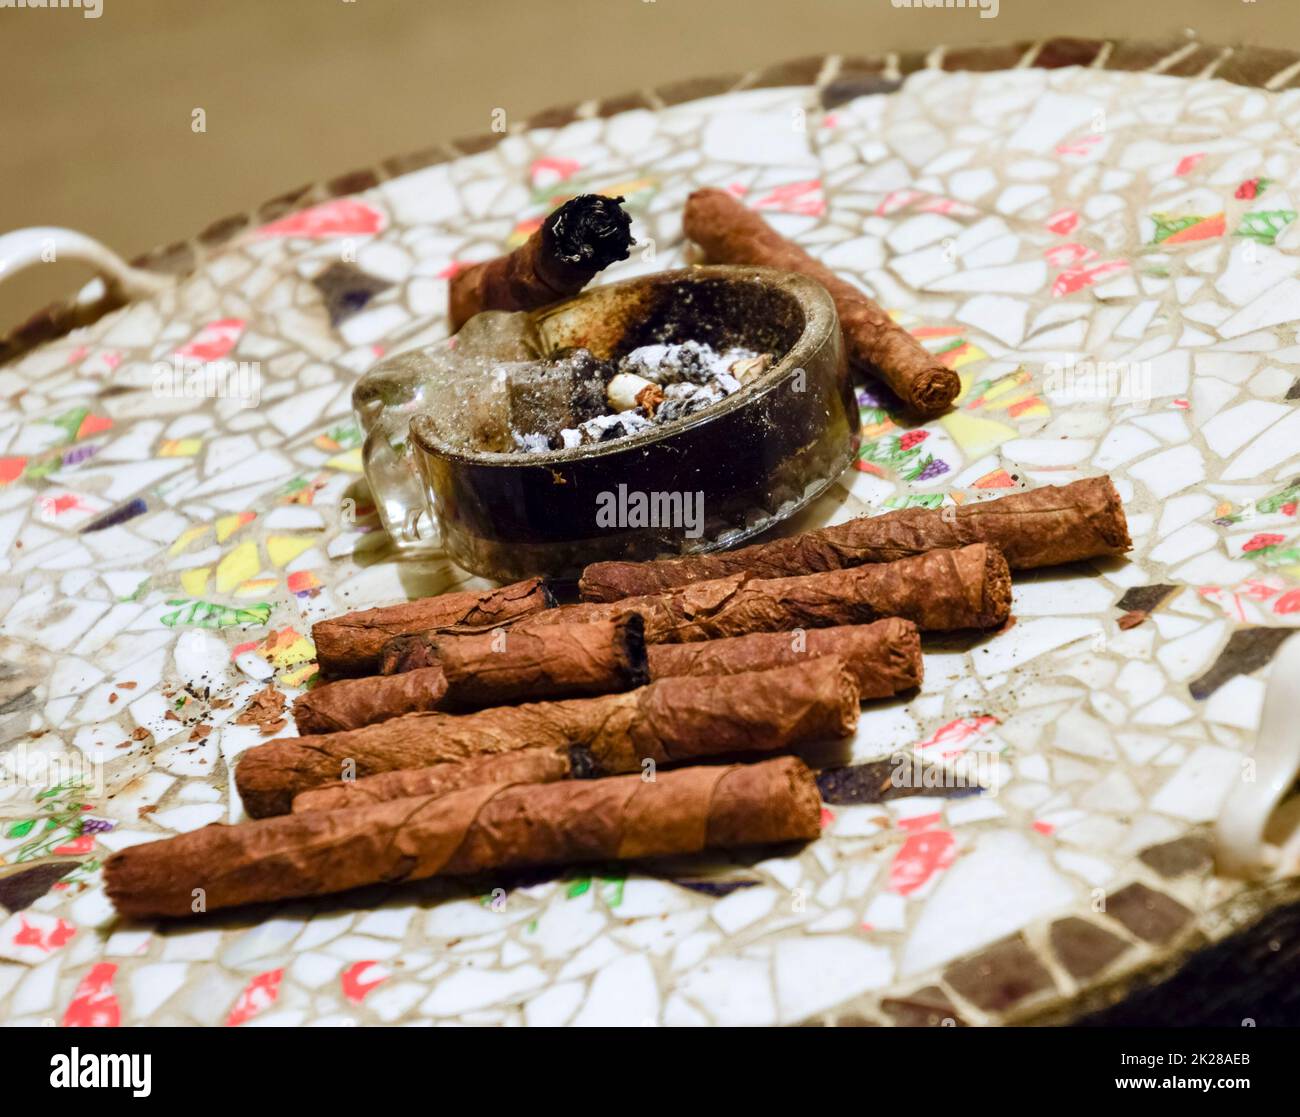 Cigar and ashtray on the table of the glued pieces of pottery. Homemade cigars from leafy tobacco leaves on a ceramic table. Ashtray and cigars. Stock Photo